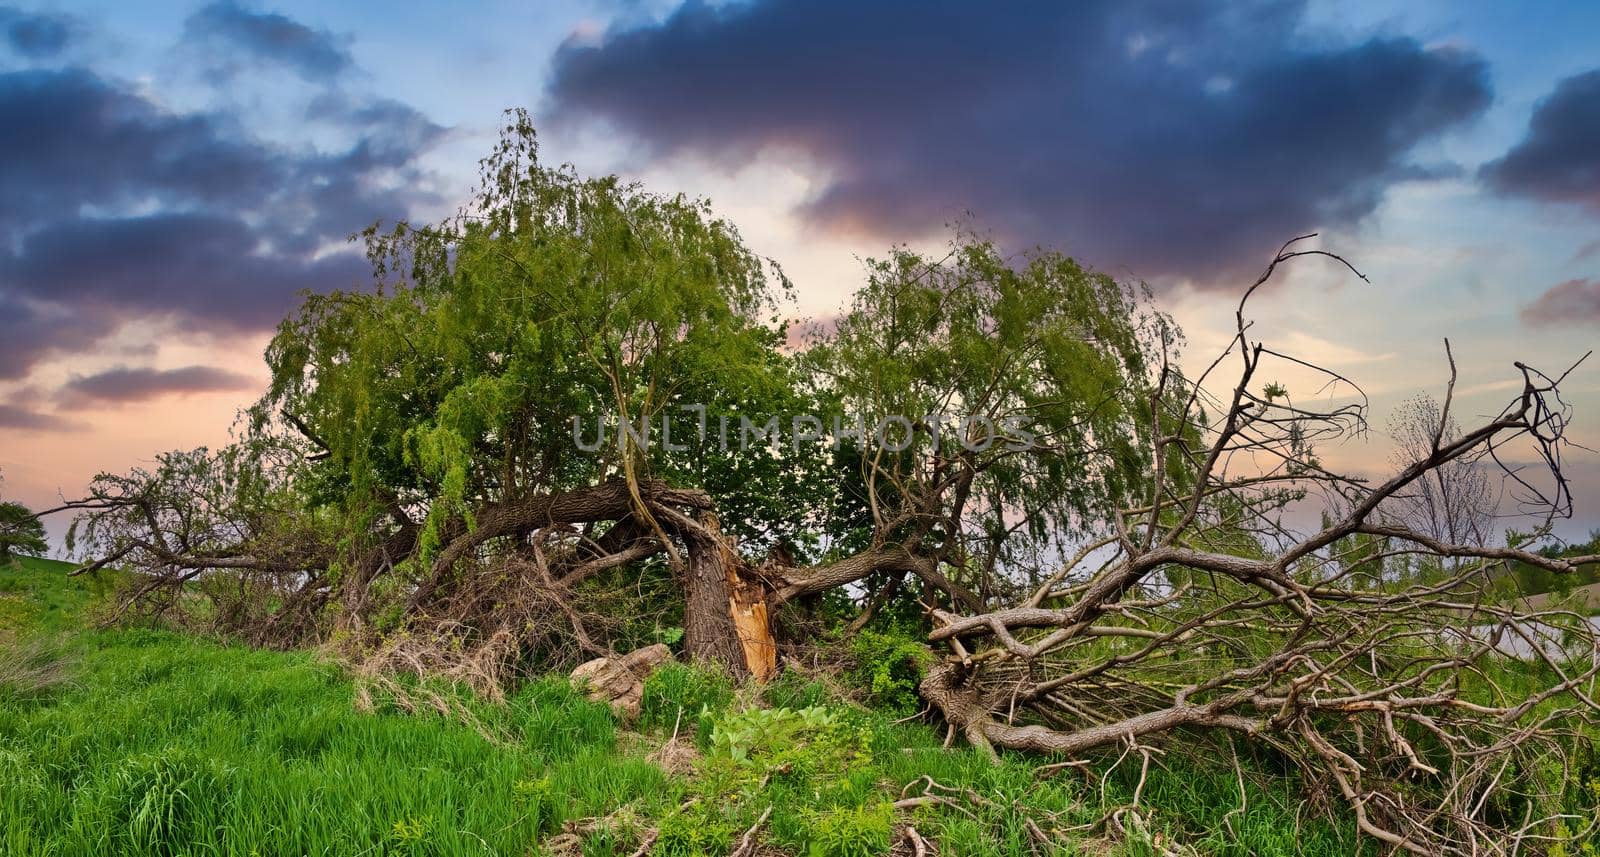 Panorama of Magnificent Giant Willow Tree Split and Broken in a Farmer's Field. High quality photo